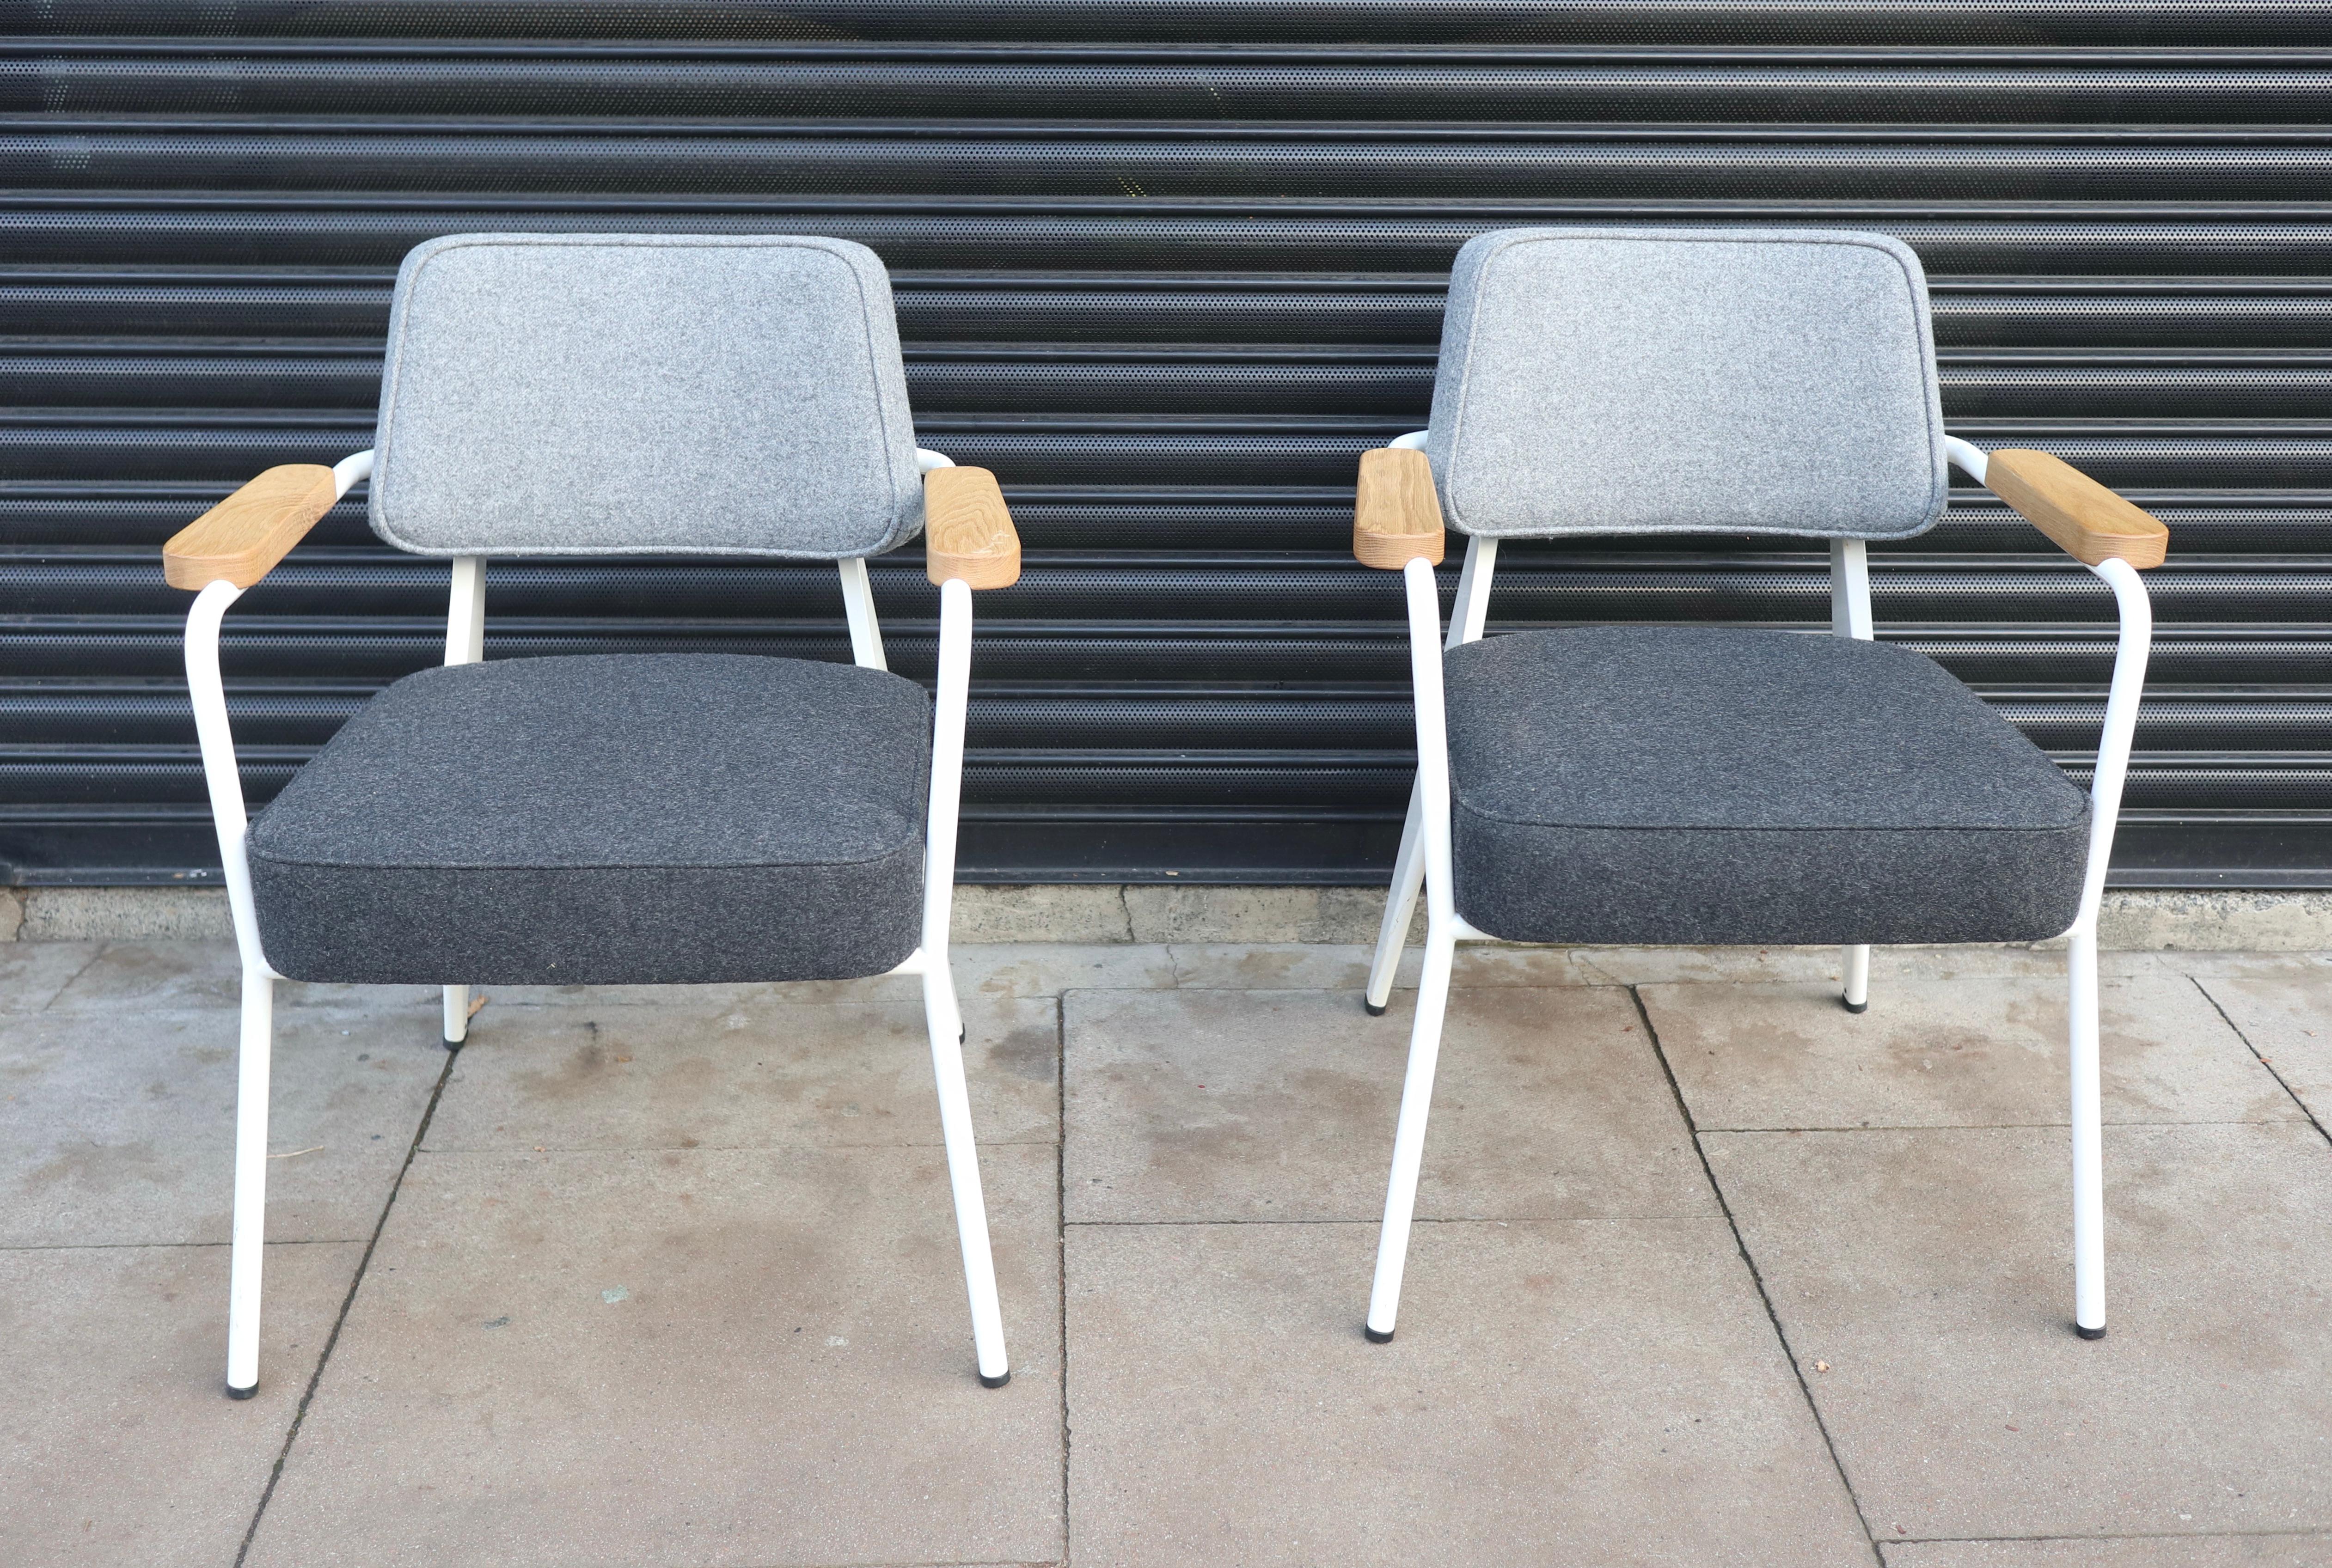 Elevate your dining experience with this pair of exquisite Fauteuil Direction carvers designed by Jean Prouvé for VITRA. Crafted in Switzerland, these chairs boast a stunning grey colour and are made of 100% wool upholstery fabric. With a length of